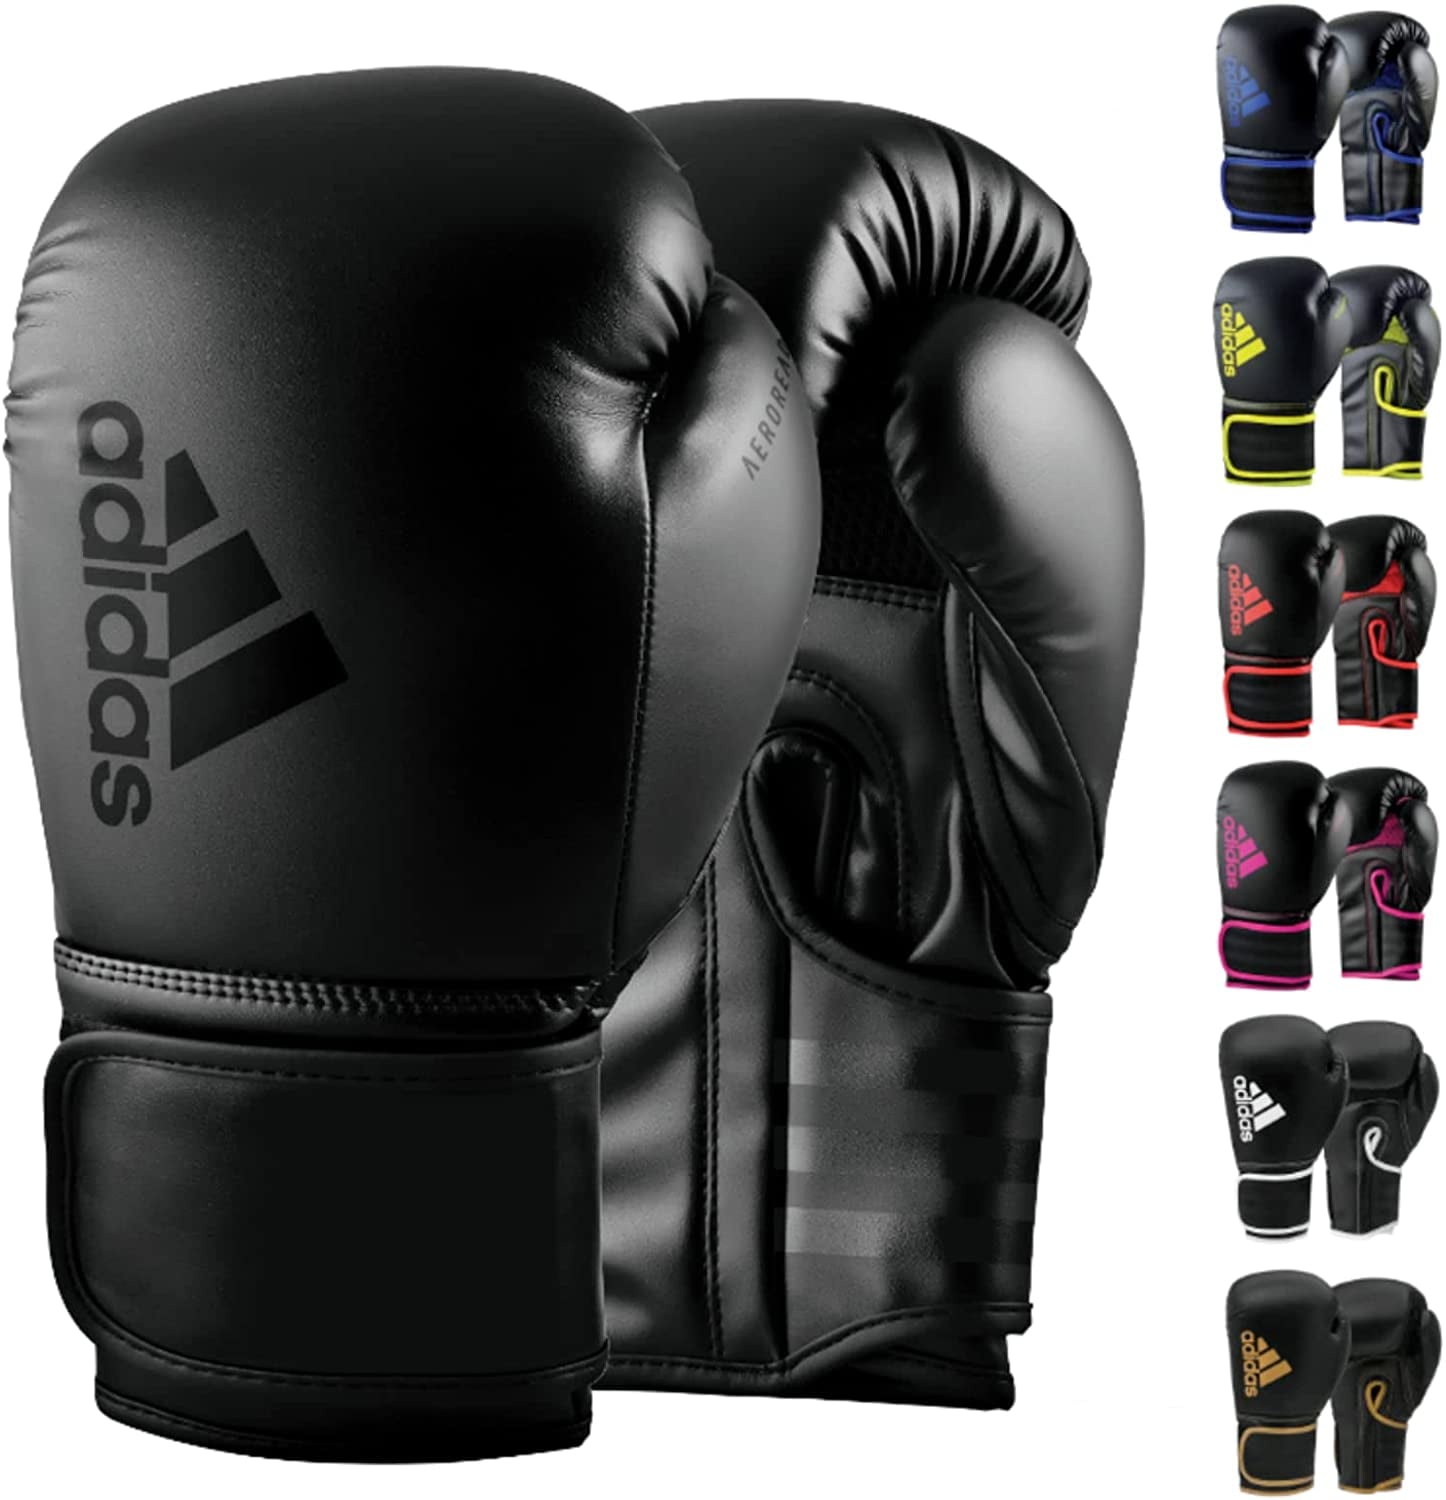 Adidas Hybrid 80 Boxing Gloves, for Boxing, Kickboxing, Training, and Bag,  for Men and Women 6 Oz., Black - Walmart.com